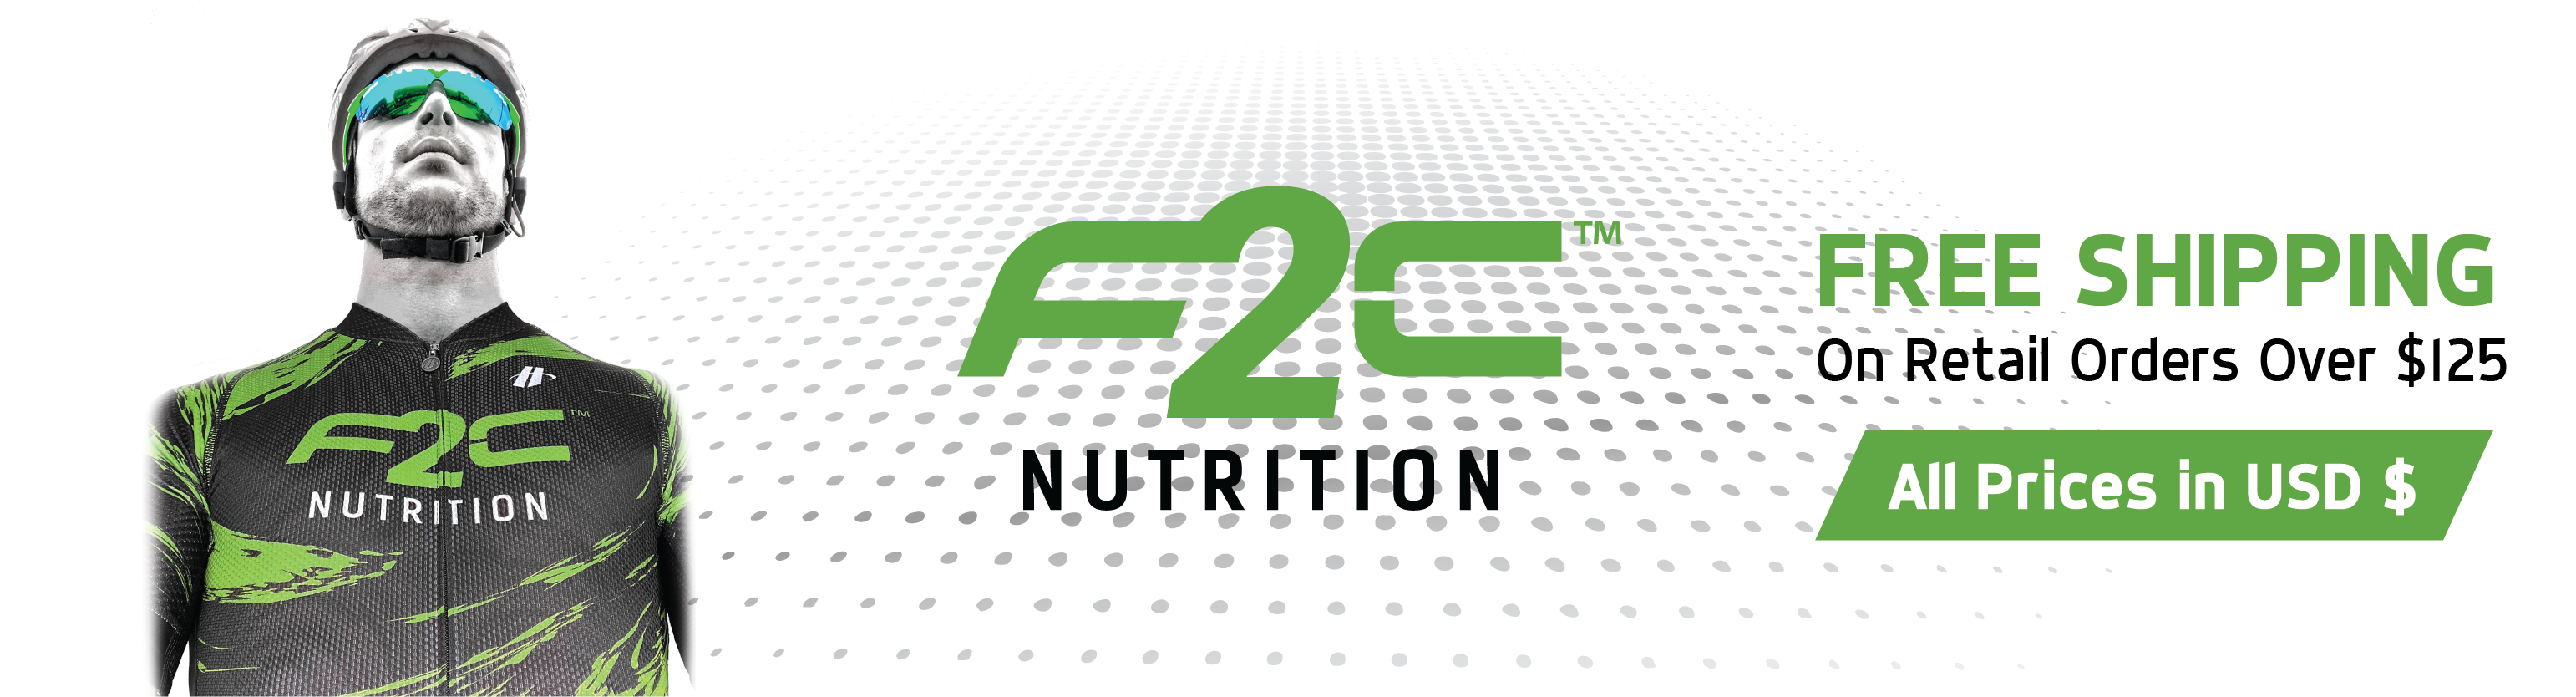 F2C NUTRITION - THE BEST NUTRITION ON EARTH 